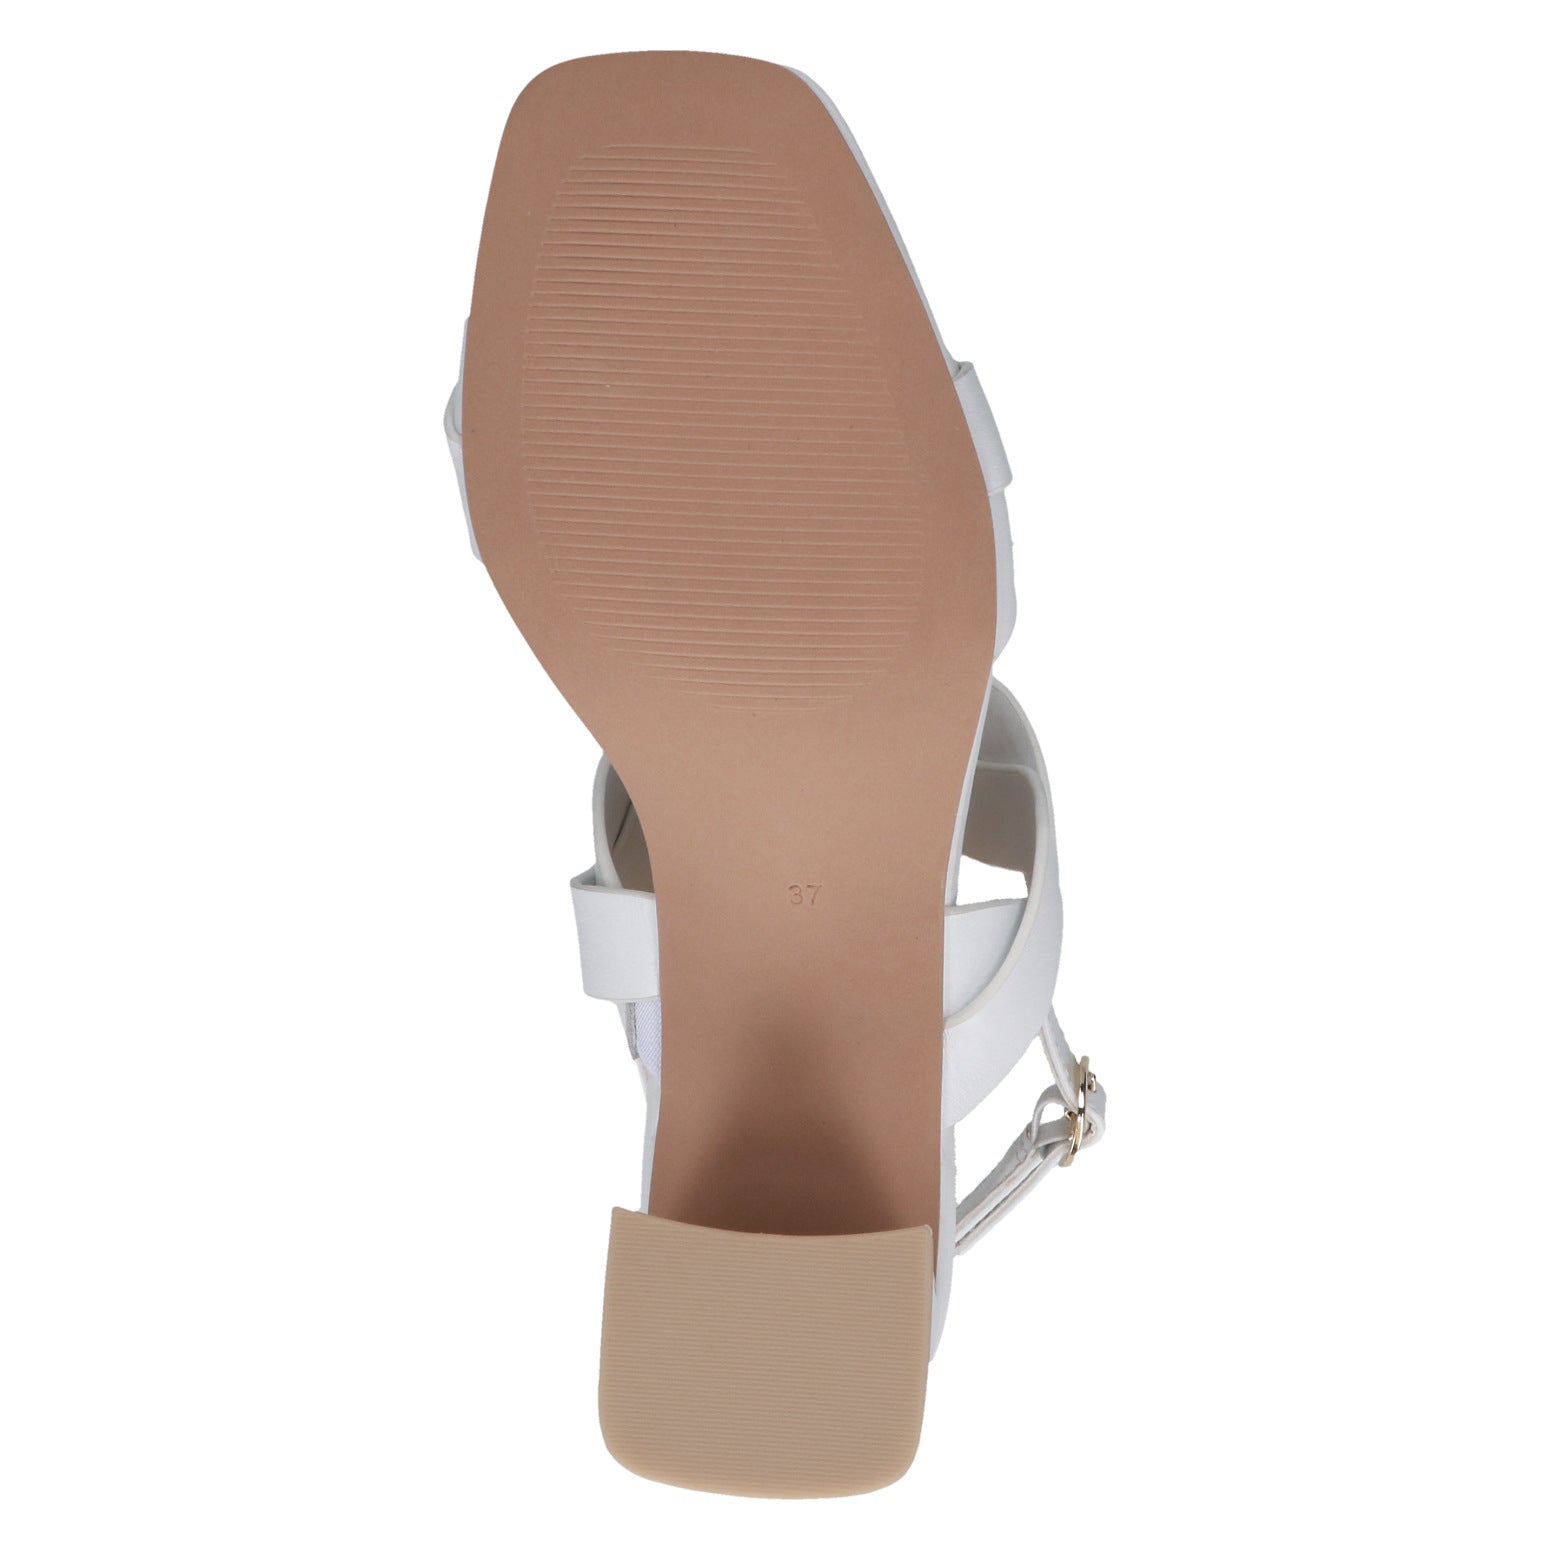 Caprice 9-28317-42 102 Ladies White Leather Buckle Sandals